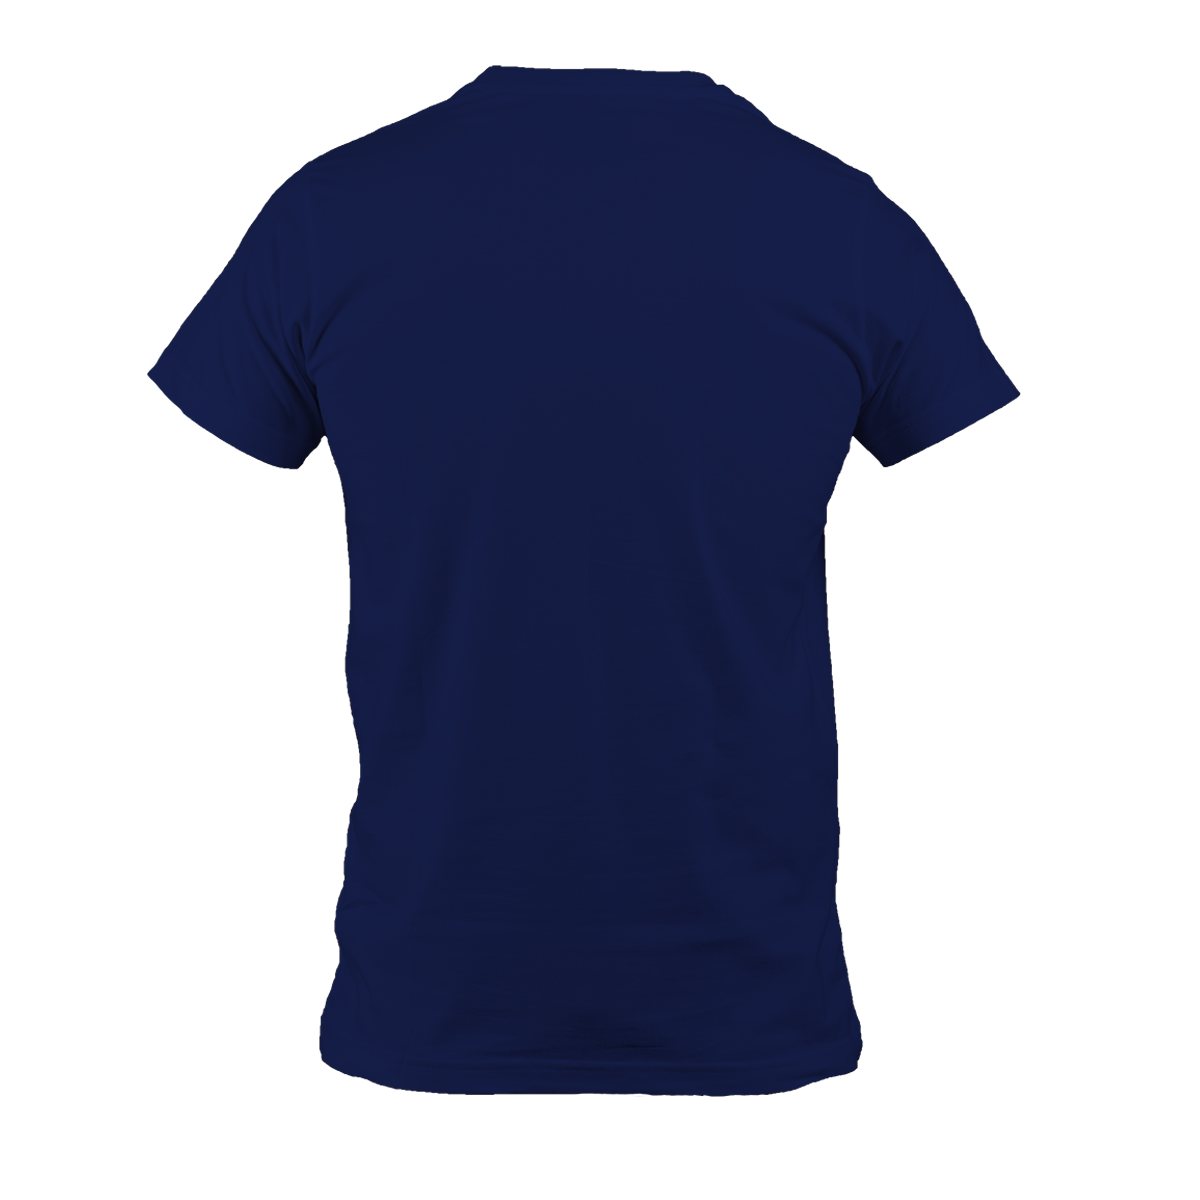 Navy Blue Round Neck Tshirt - Branding & Printing Solutions Company in ...